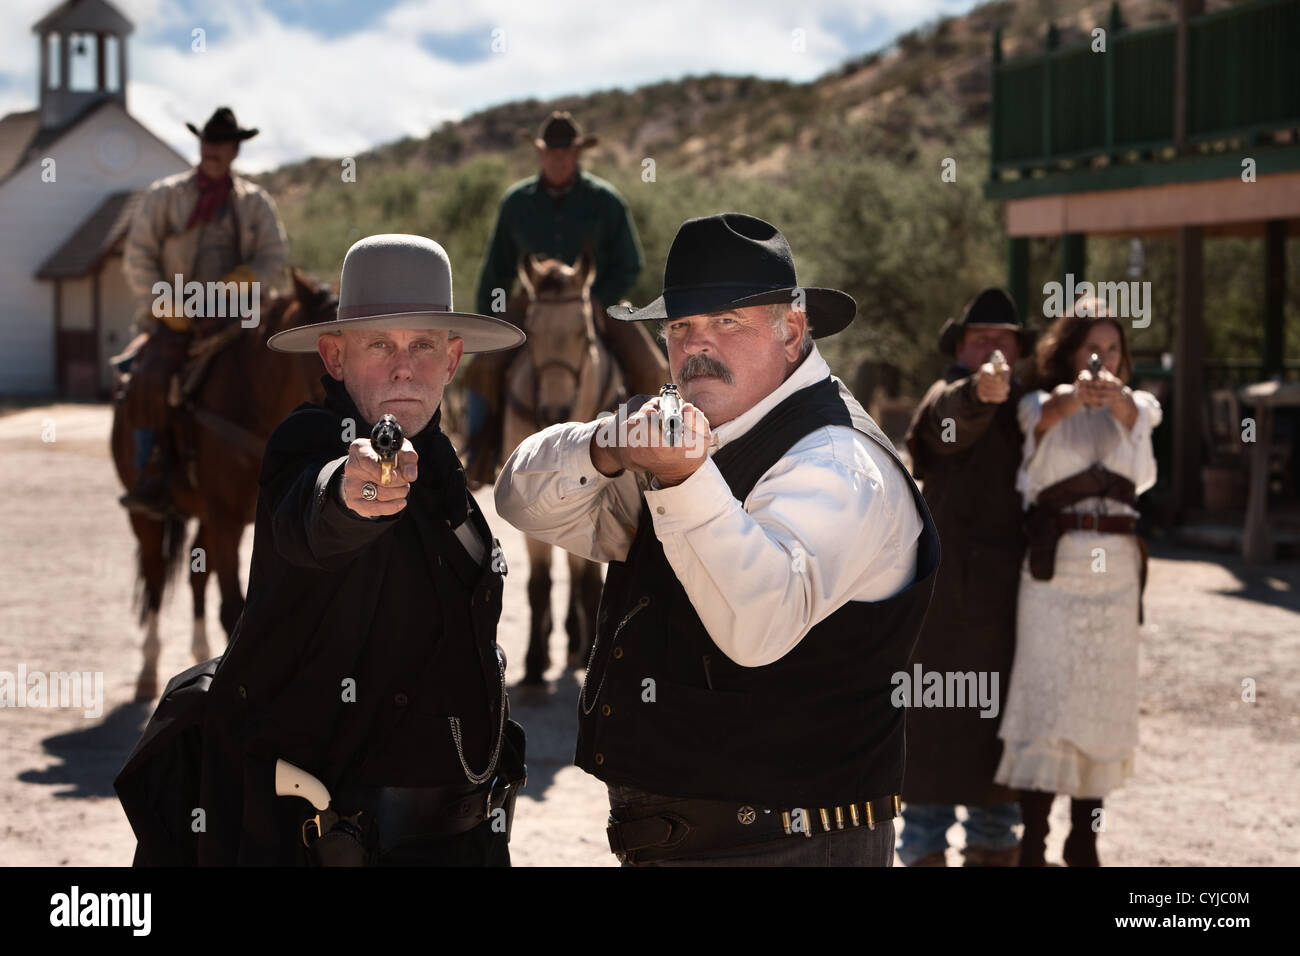 Brave men aim their guns in old west town Stock Photo